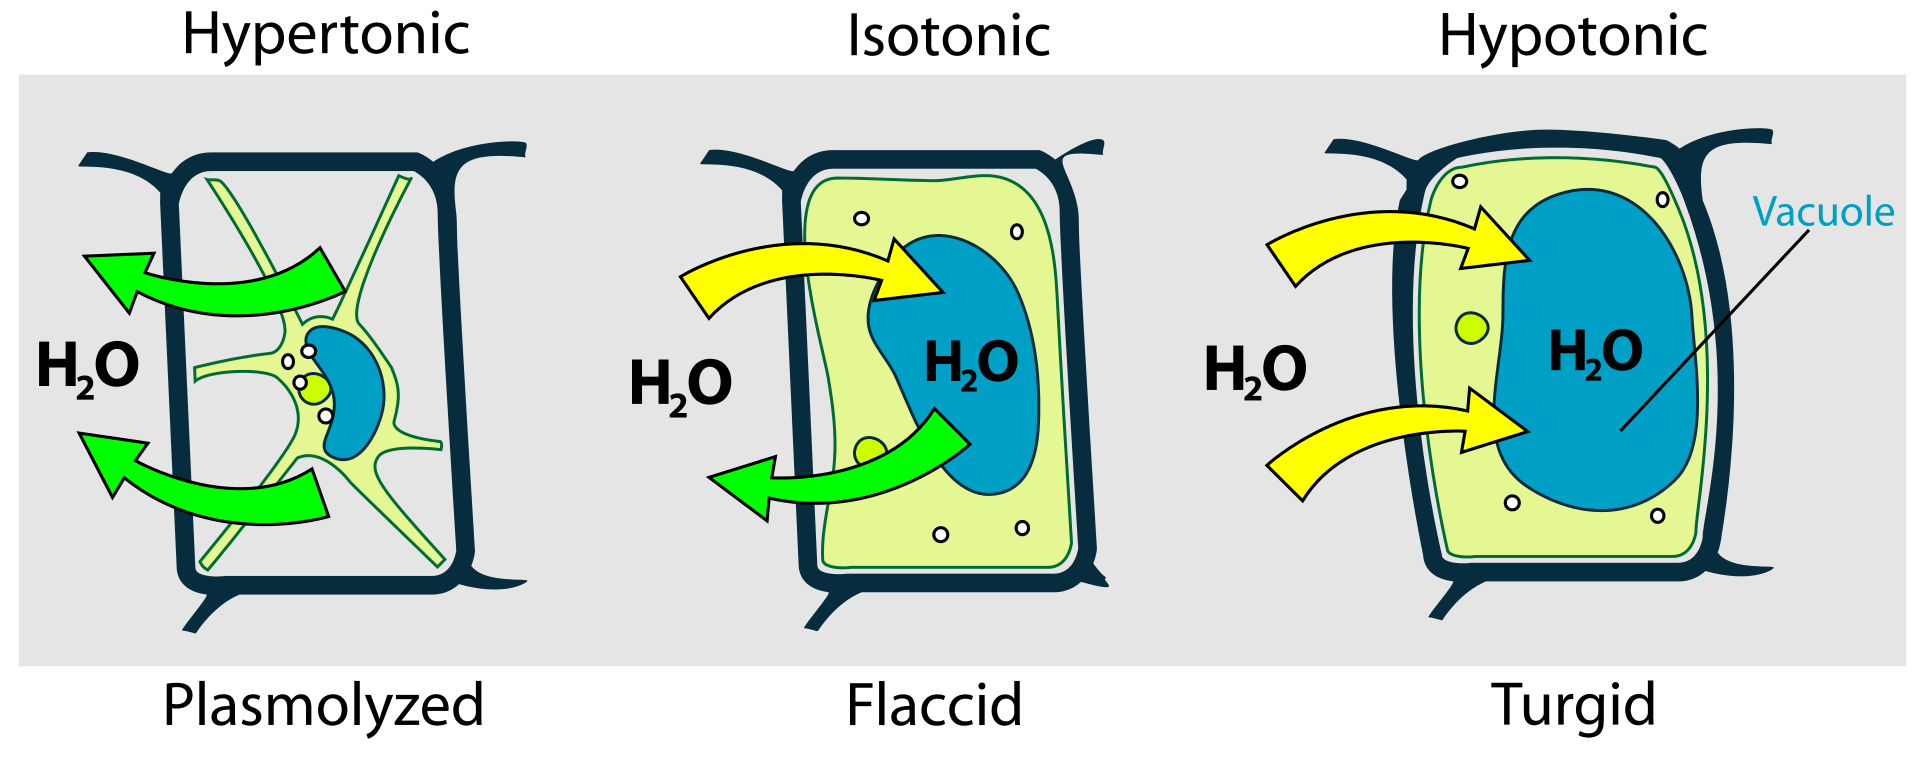 Change in plant cell shape due to dissolved solutes